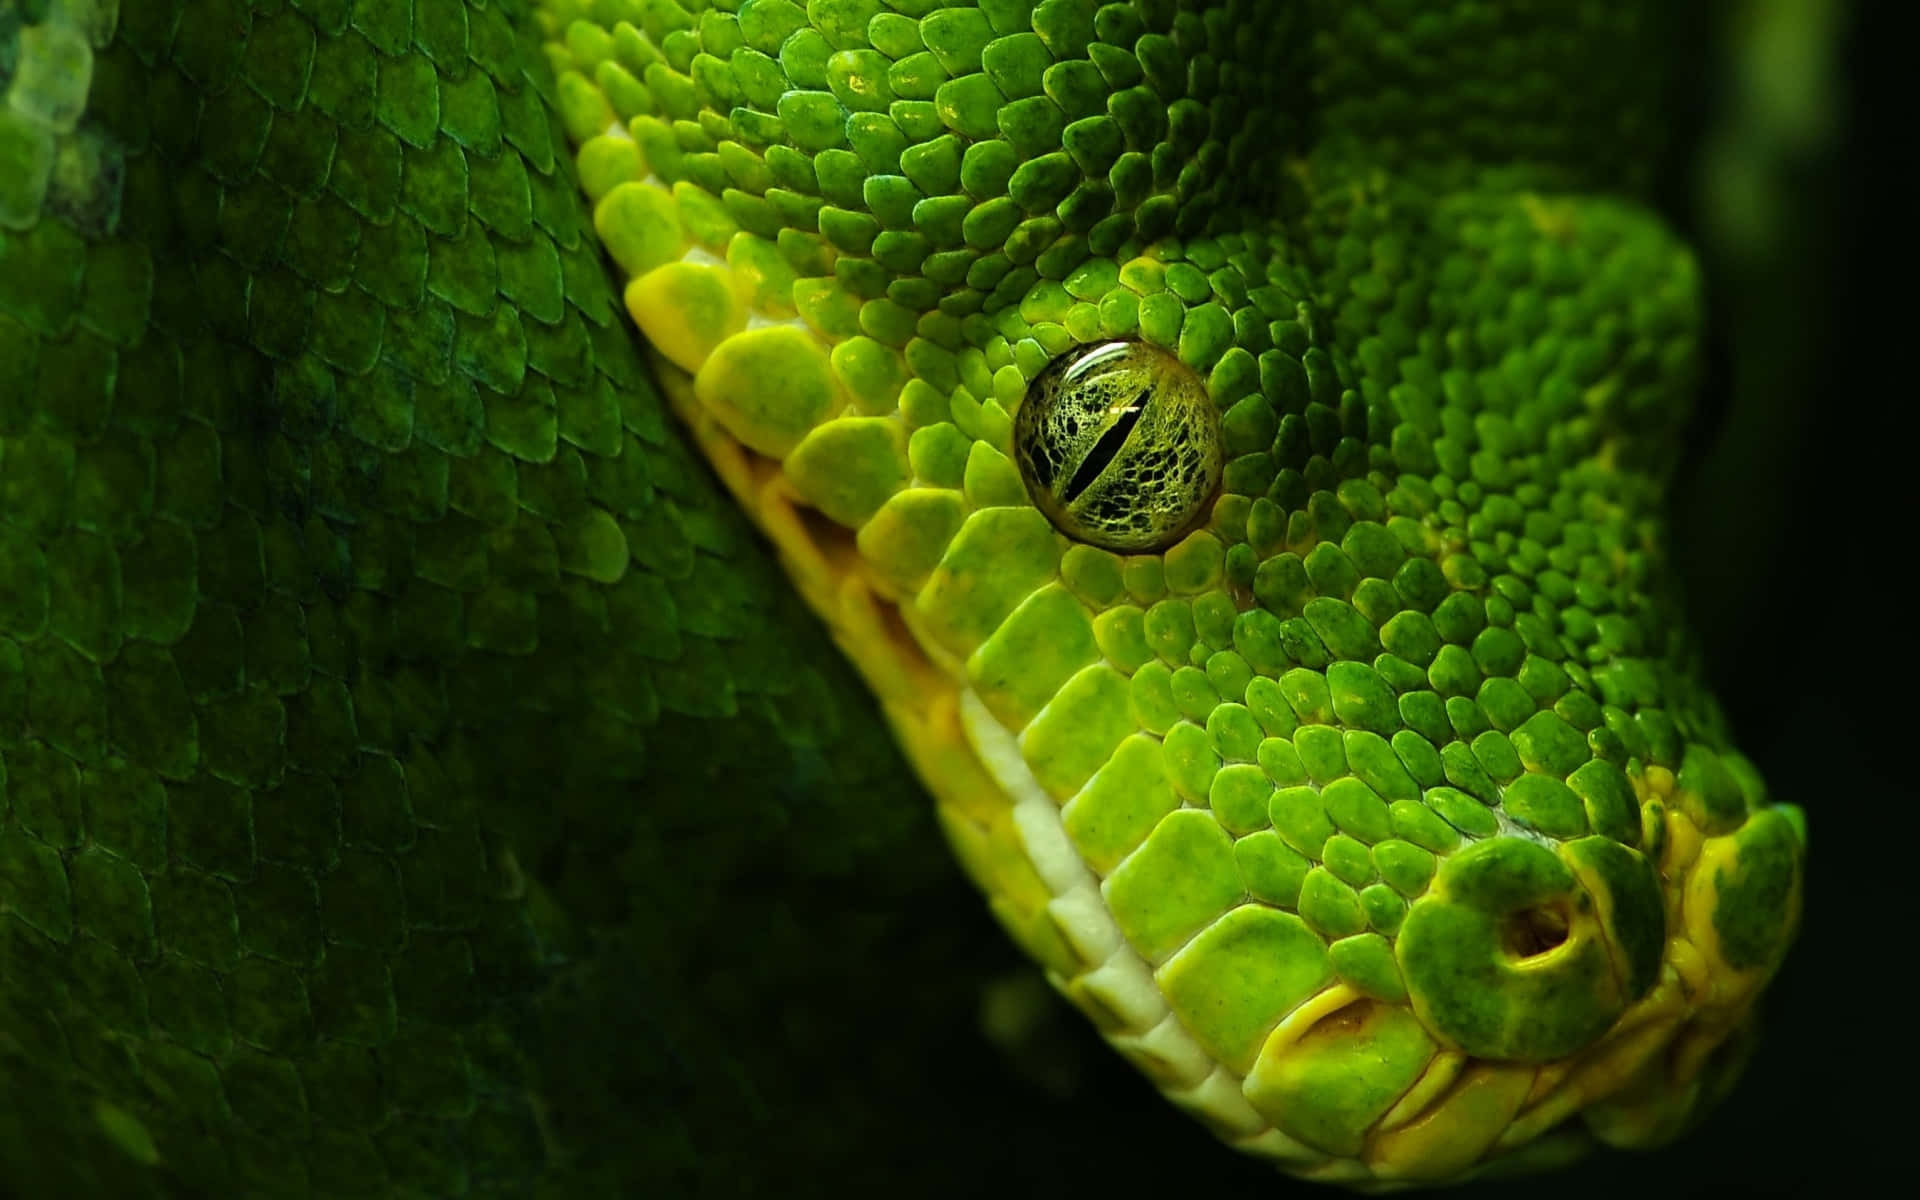 This Coiled Cool Snake Glistens Under The Bright Sunlight. Wallpaper